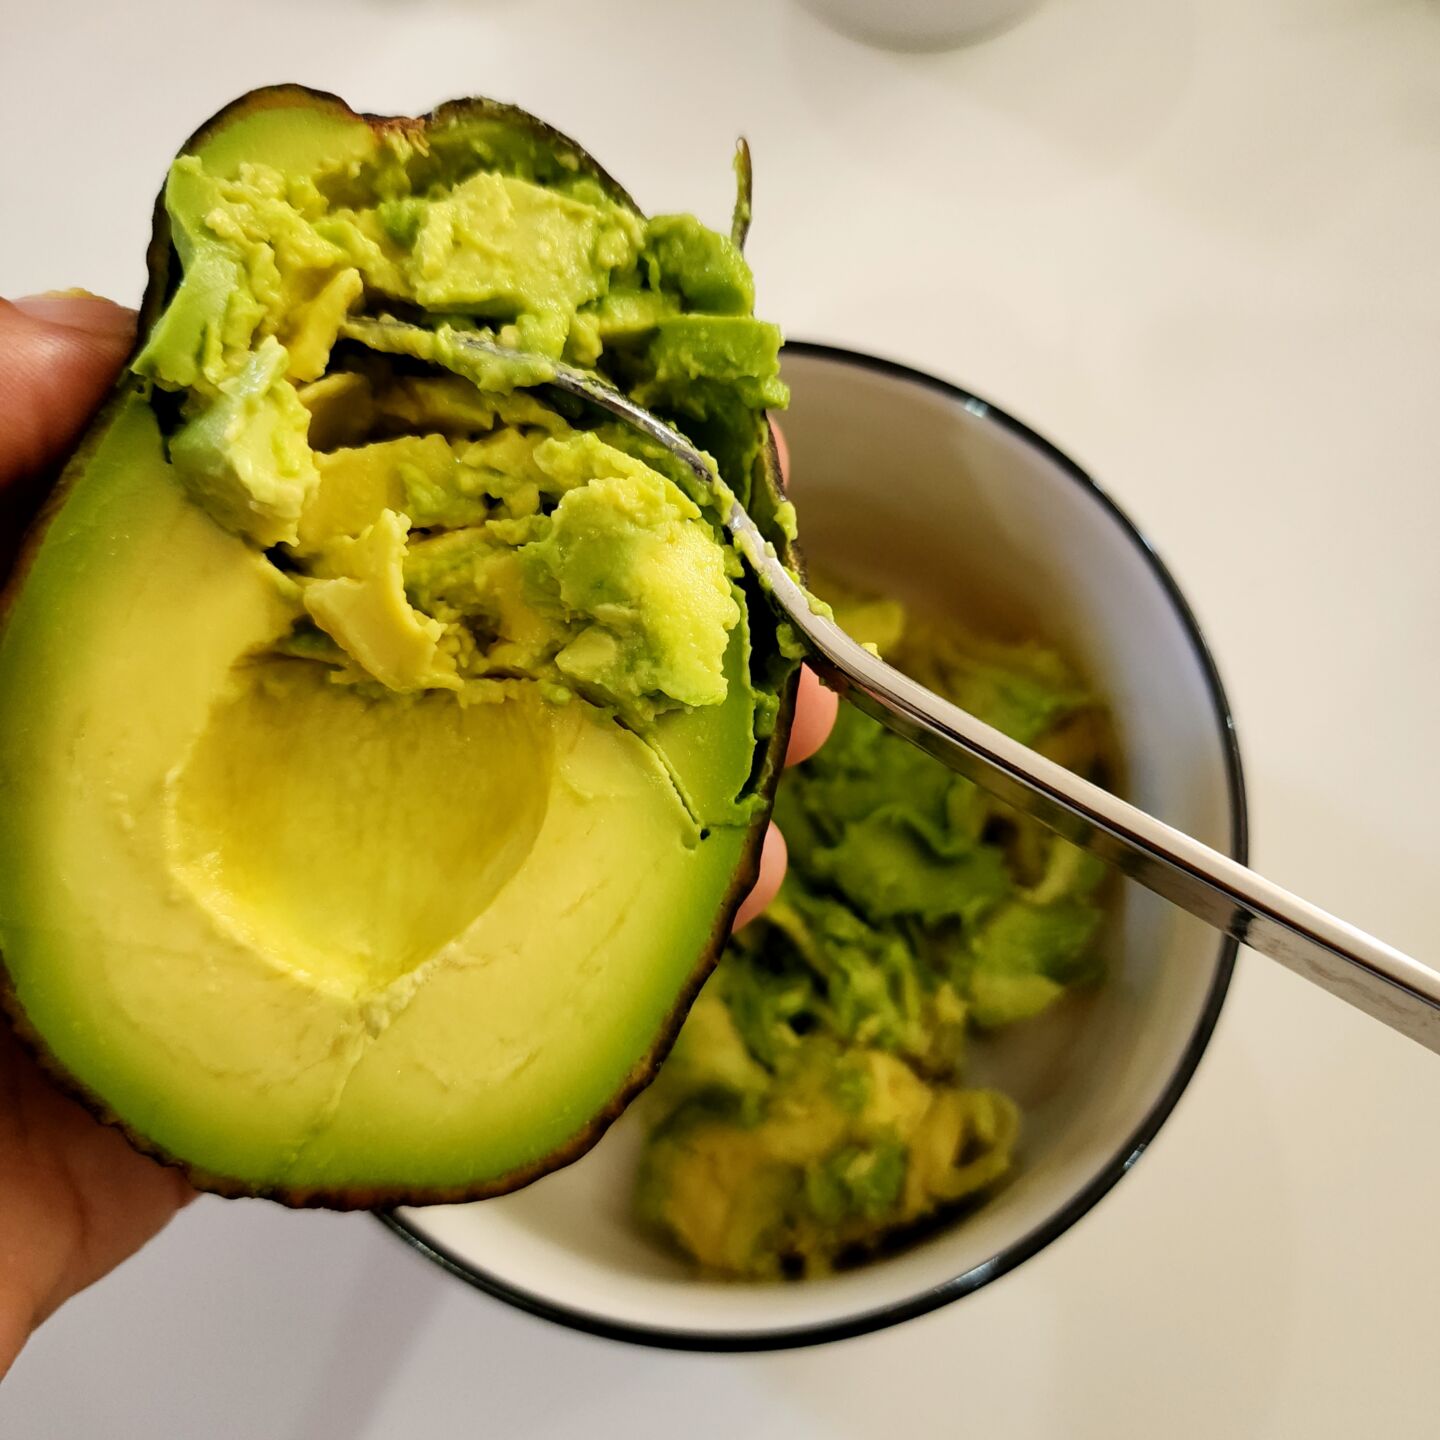 Cut the avocado in half, scoop out the avocado flesh and mash